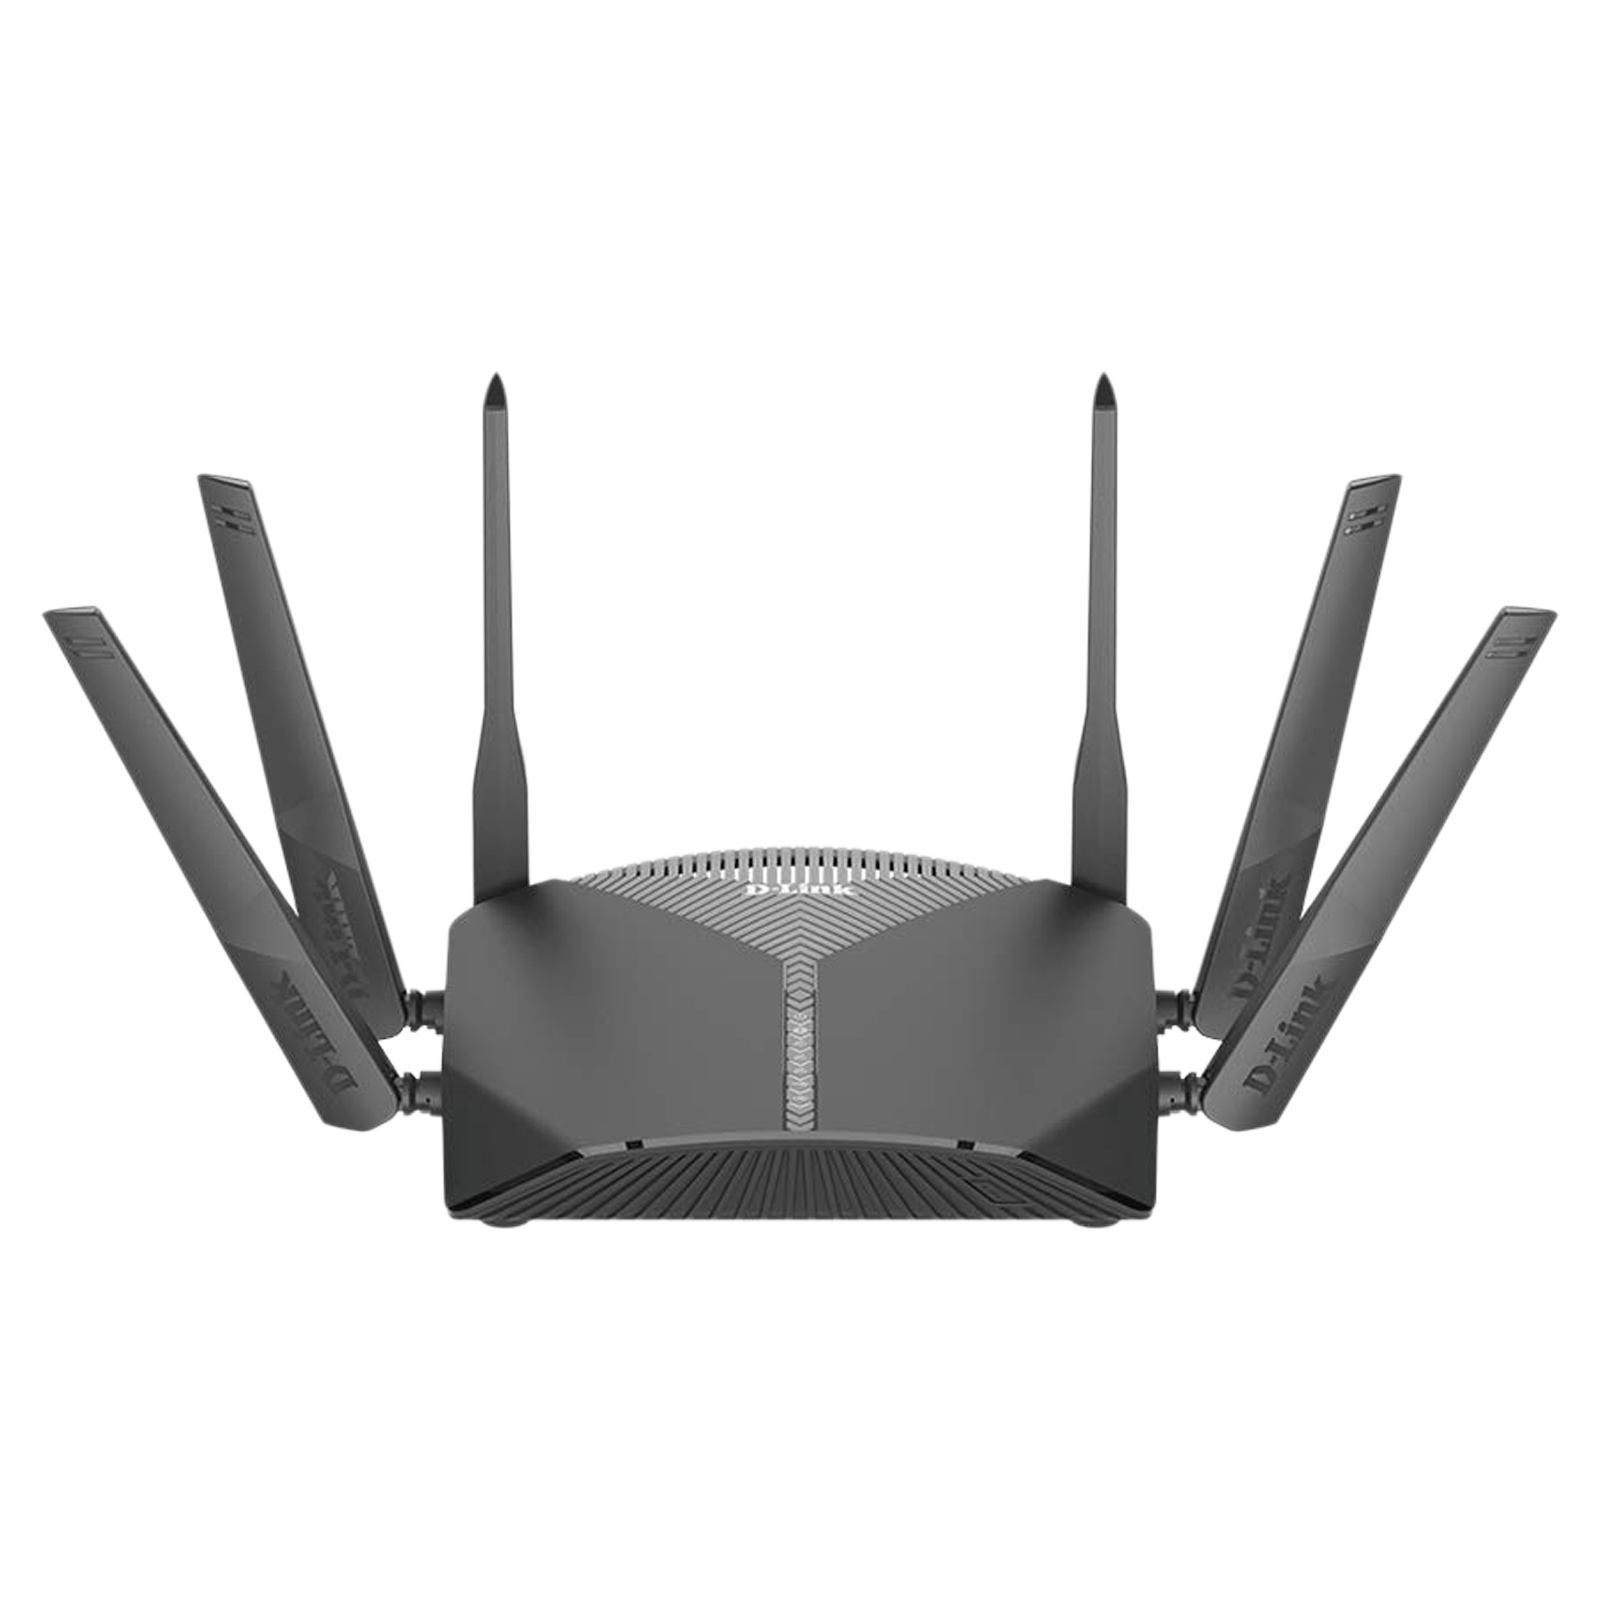 D-Link AC3000 Triple Band 3000 Mbps WiFi Router (6 Antennas, 4 LAN Ports, Automatic Firmware Update with WPA and WPA2-PSK  Encryption, DIR-3040, Black)_1